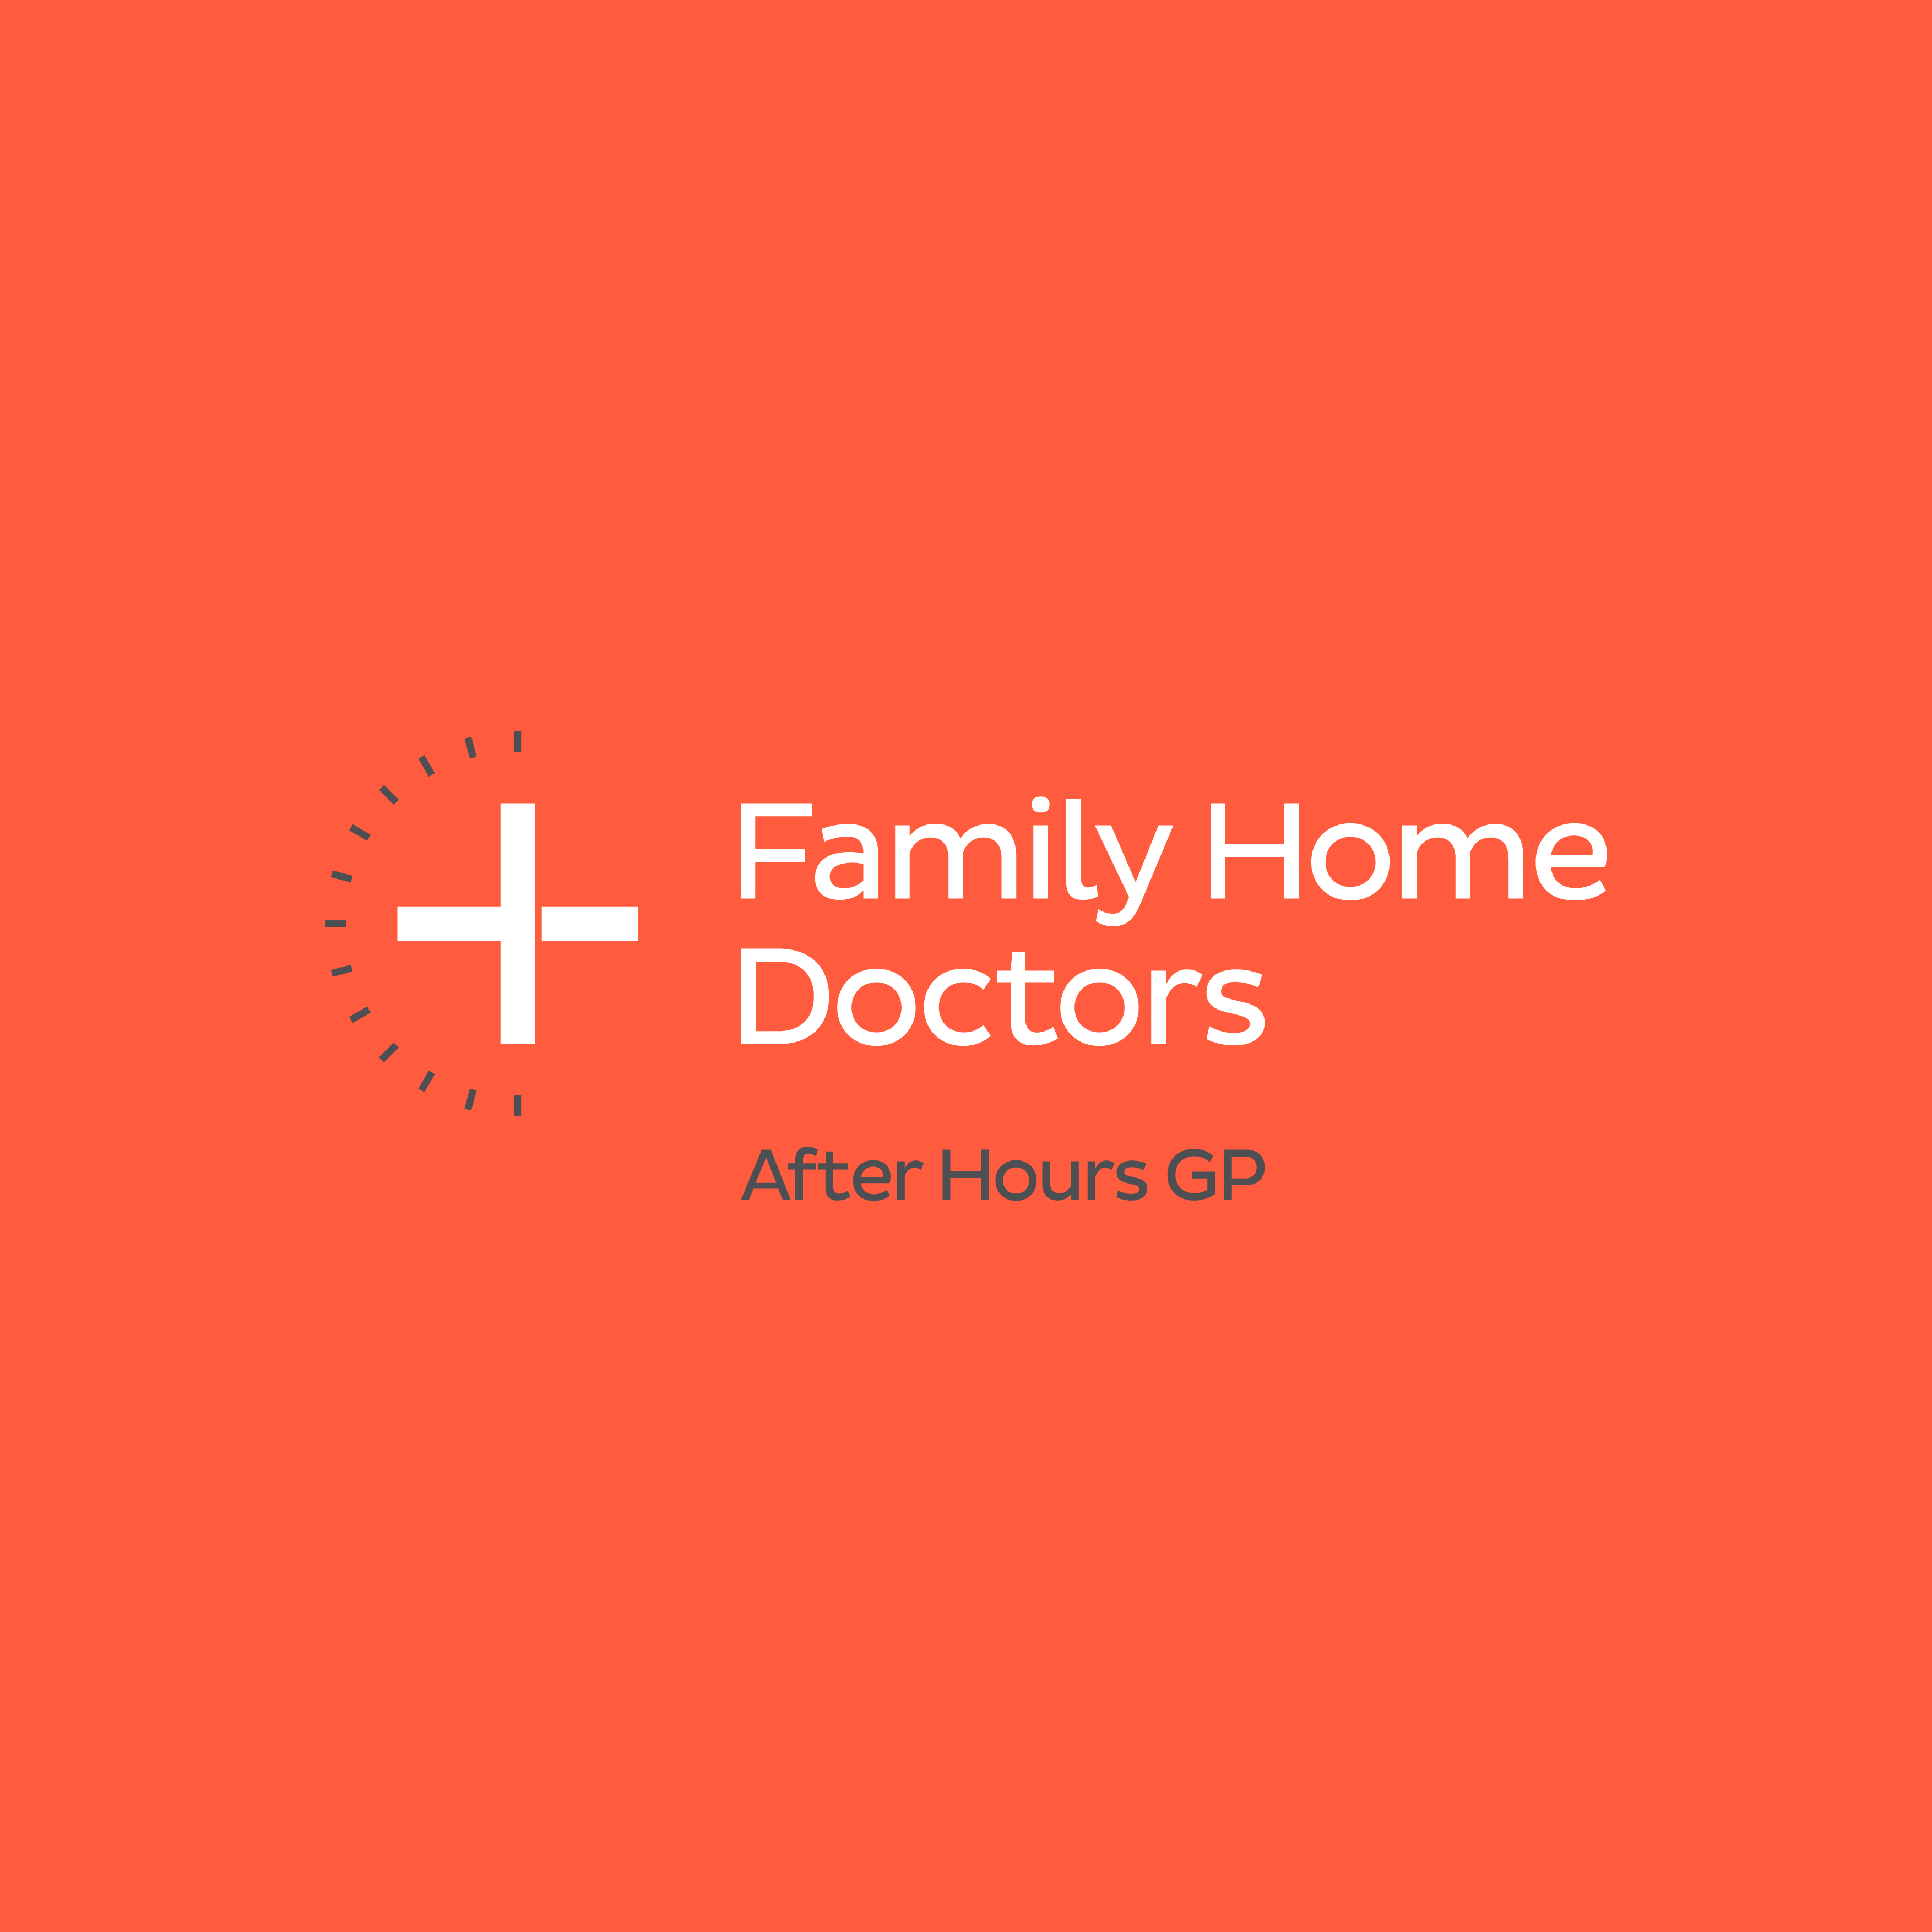 Family Home Doctors